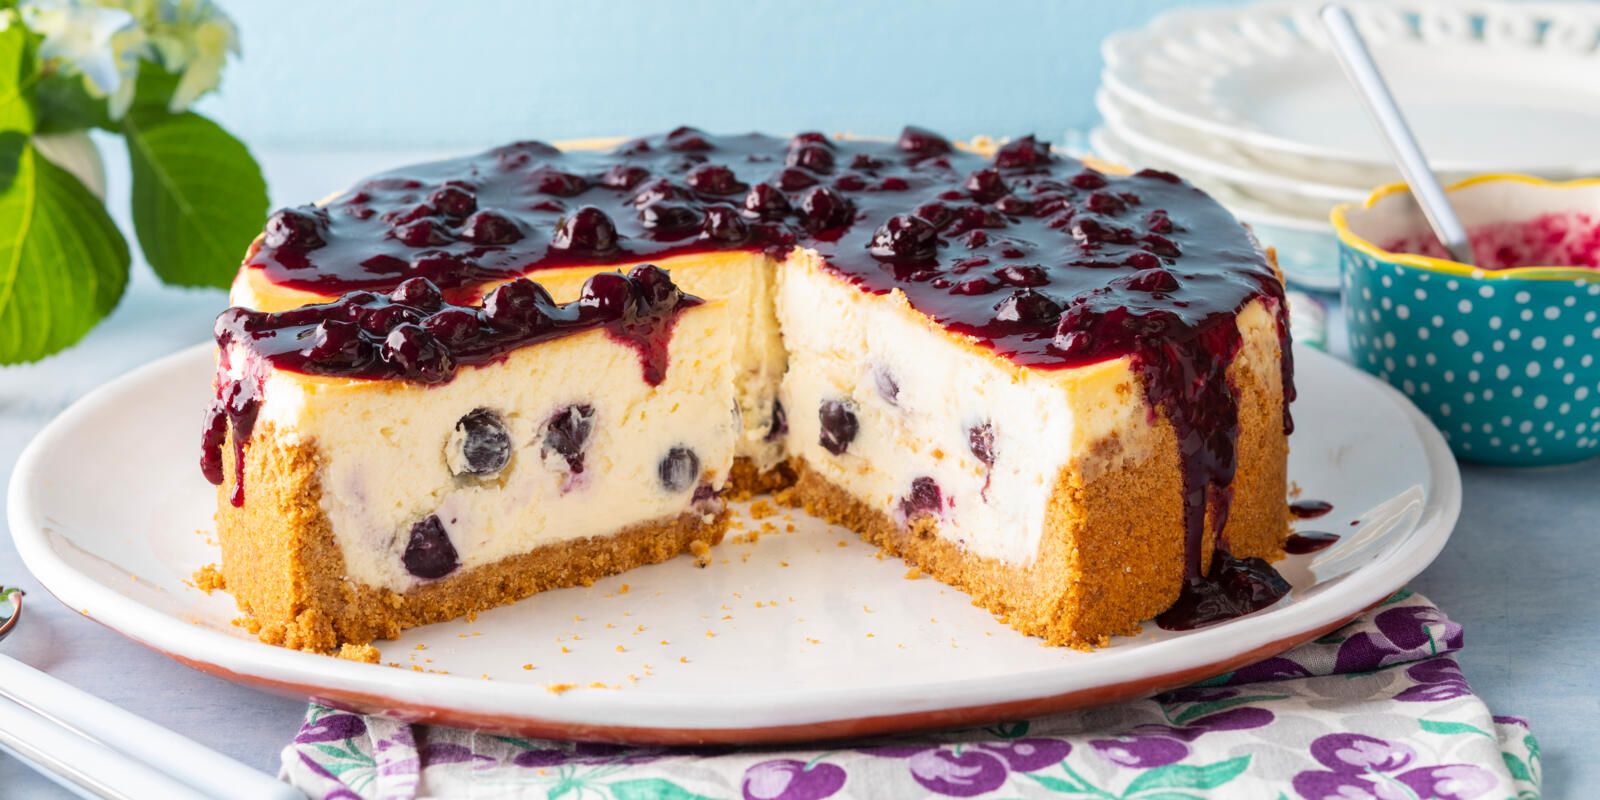 Skinny No-Cook Blueberry Cheesecake - Kevin's Healthy Kitchen